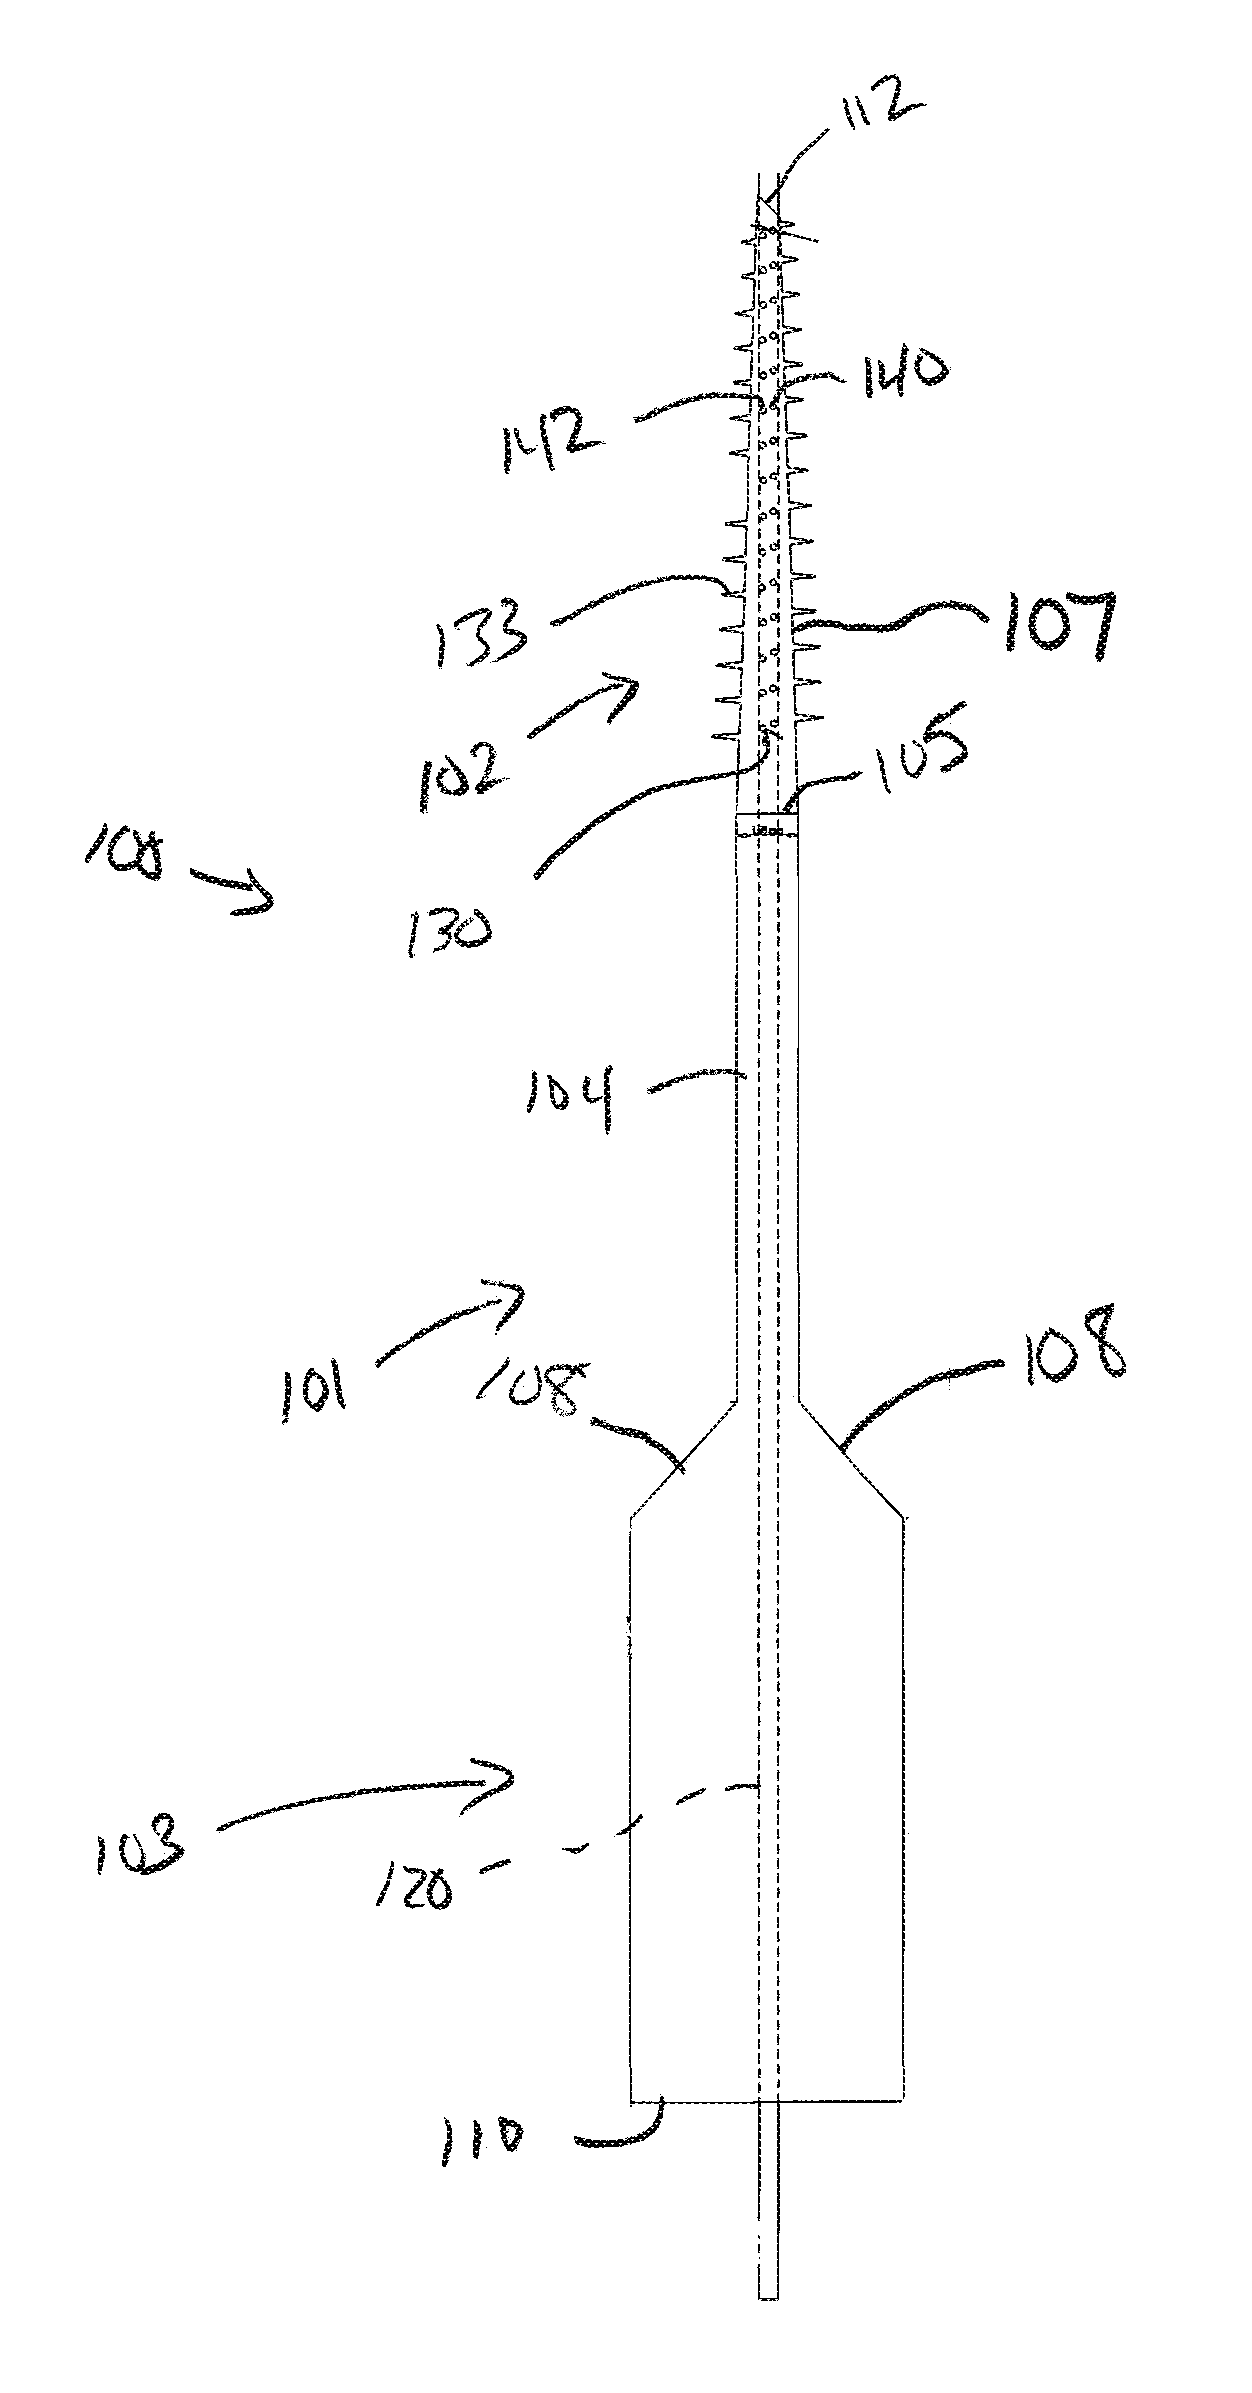 Method of Manufacturing an Interdental Cleaner